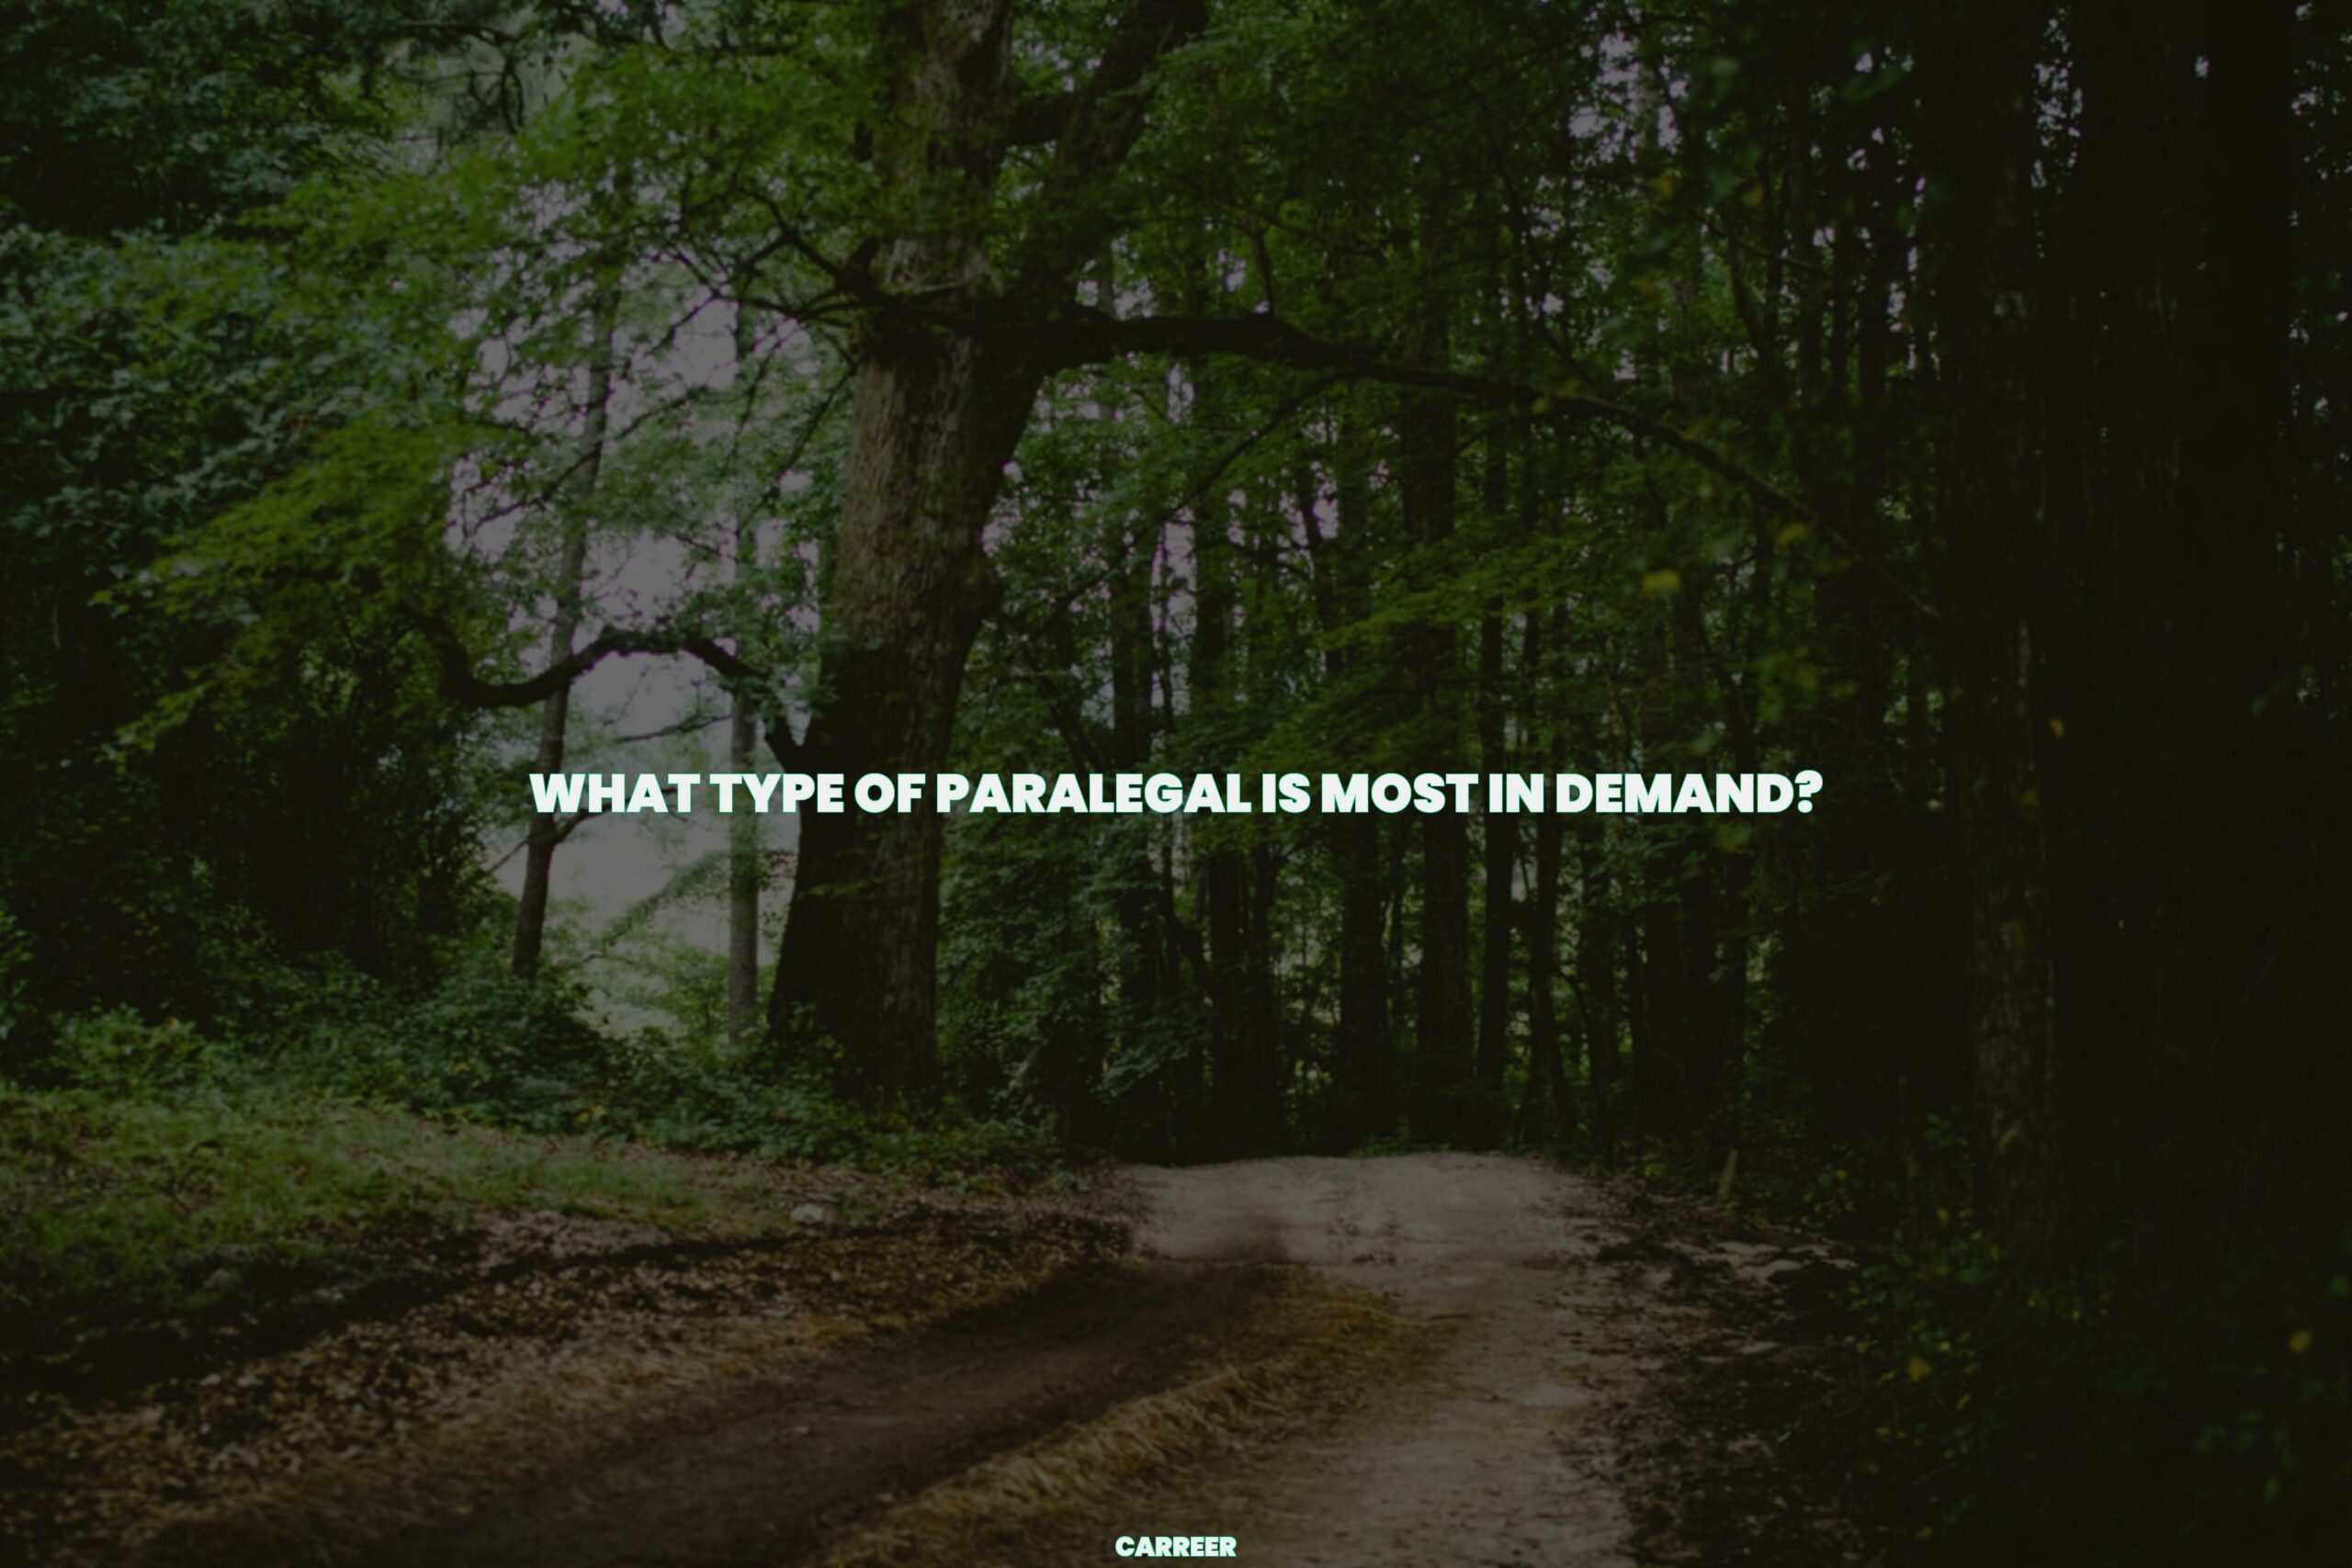 What type of paralegal is most in demand?